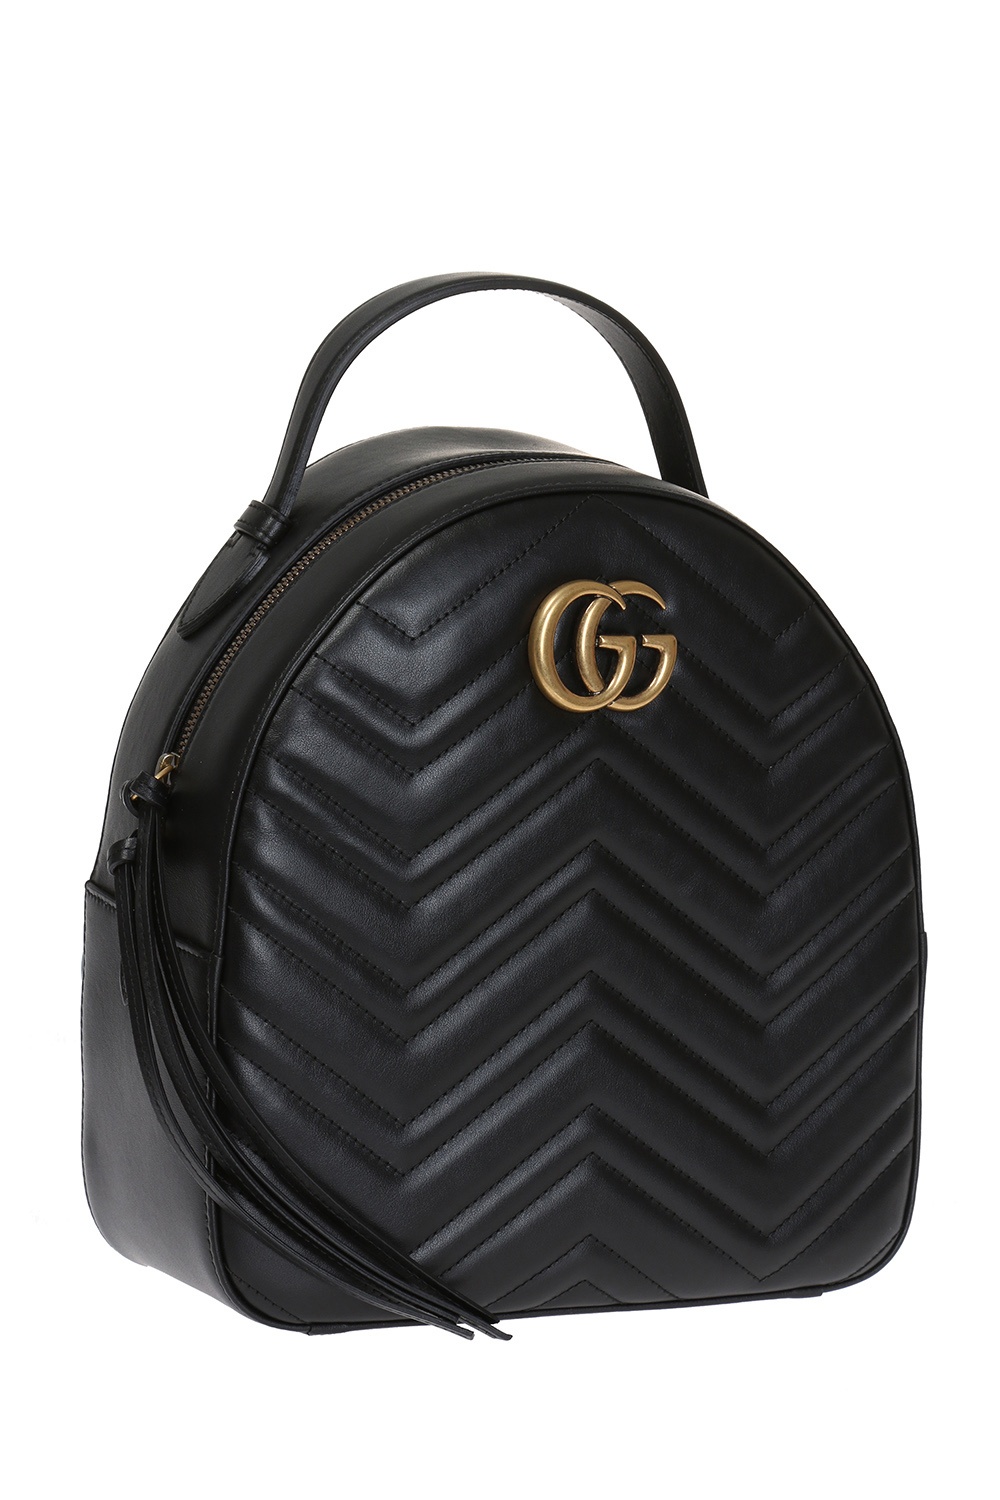 BALO NỮ GUCCI MARMONT BACKPACK 7